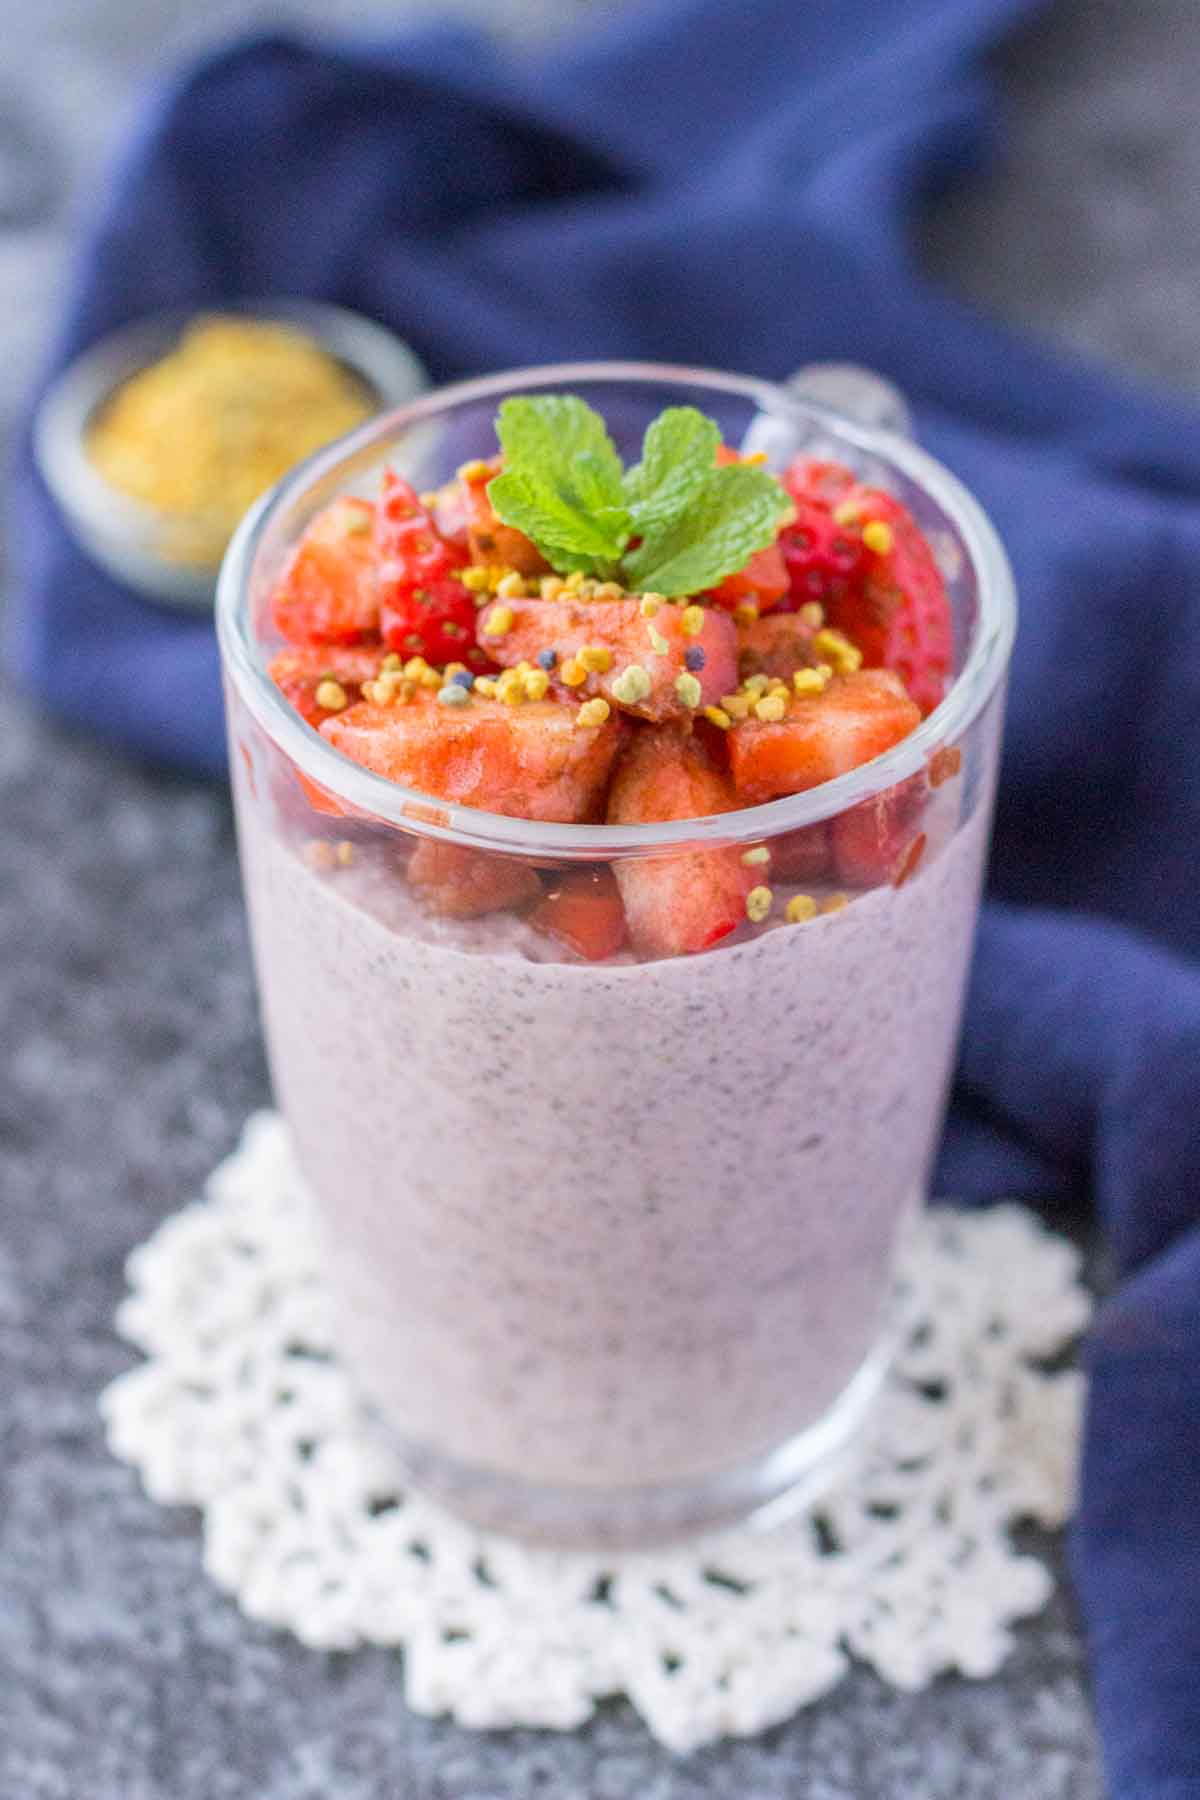 Strawberry Chia Pudding served in a glass jar topped with fresh strawberries